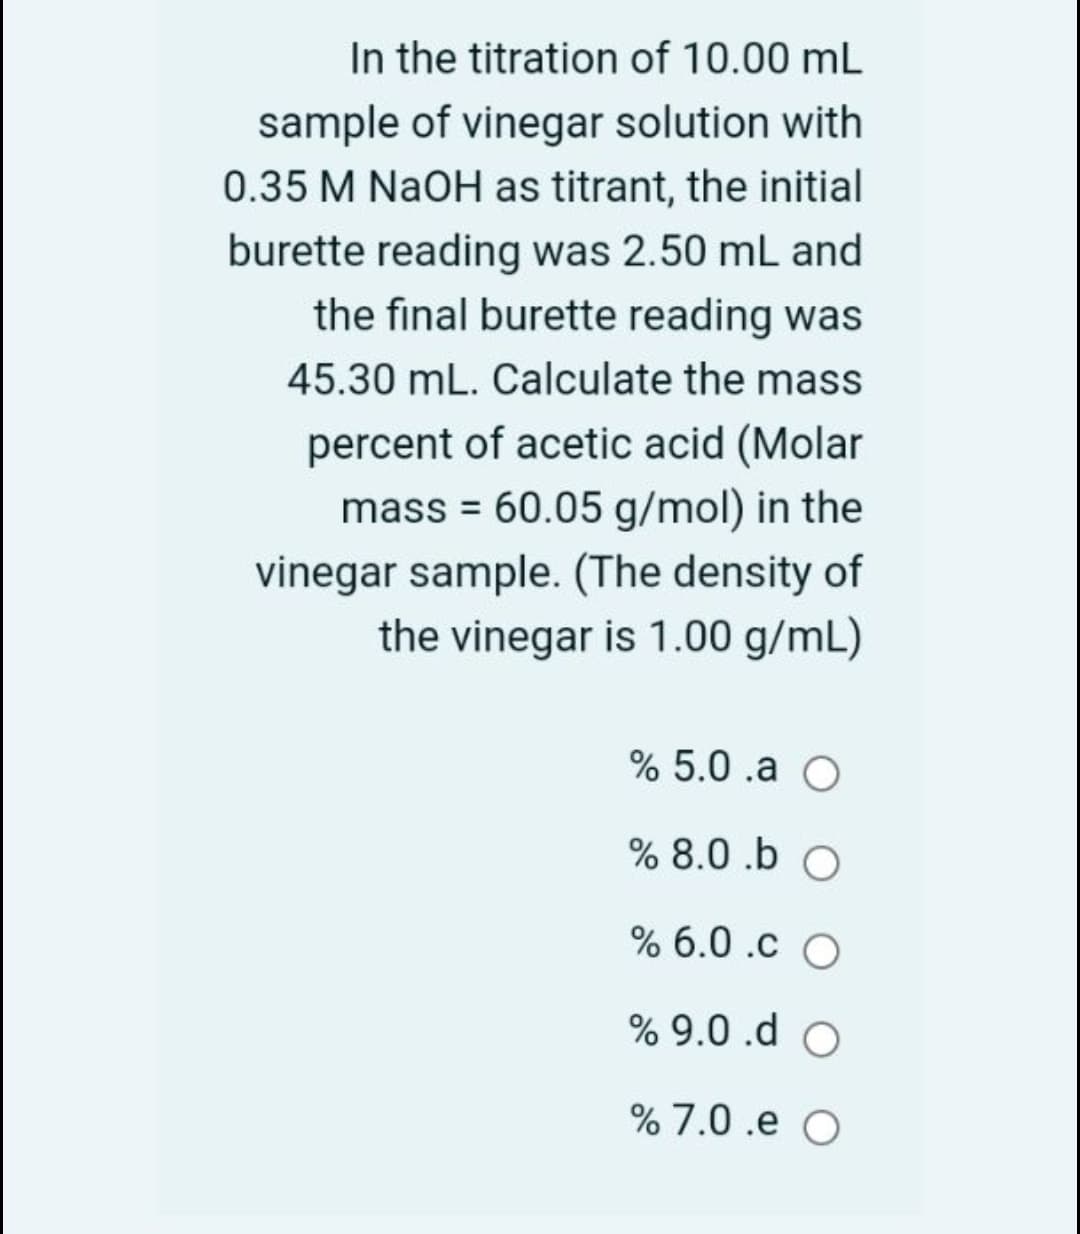 In the titration of 10.00 mL
sample of vinegar solution with
0.35 M NaOH as titrant, the initial
burette reading was 2.50 mL and
the final burette reading was
45.30 mL. Calculate the mass
percent of acetic acid (Molar
mass = 60.05 g/mol) in the
vinegar sample. (The density of
the vinegar is 1.00 g/mL)
% 5.0 .a O
% 8.0 .b O
% 6.0 .c O
% 9.0 .d O
% 7.0 .e O
